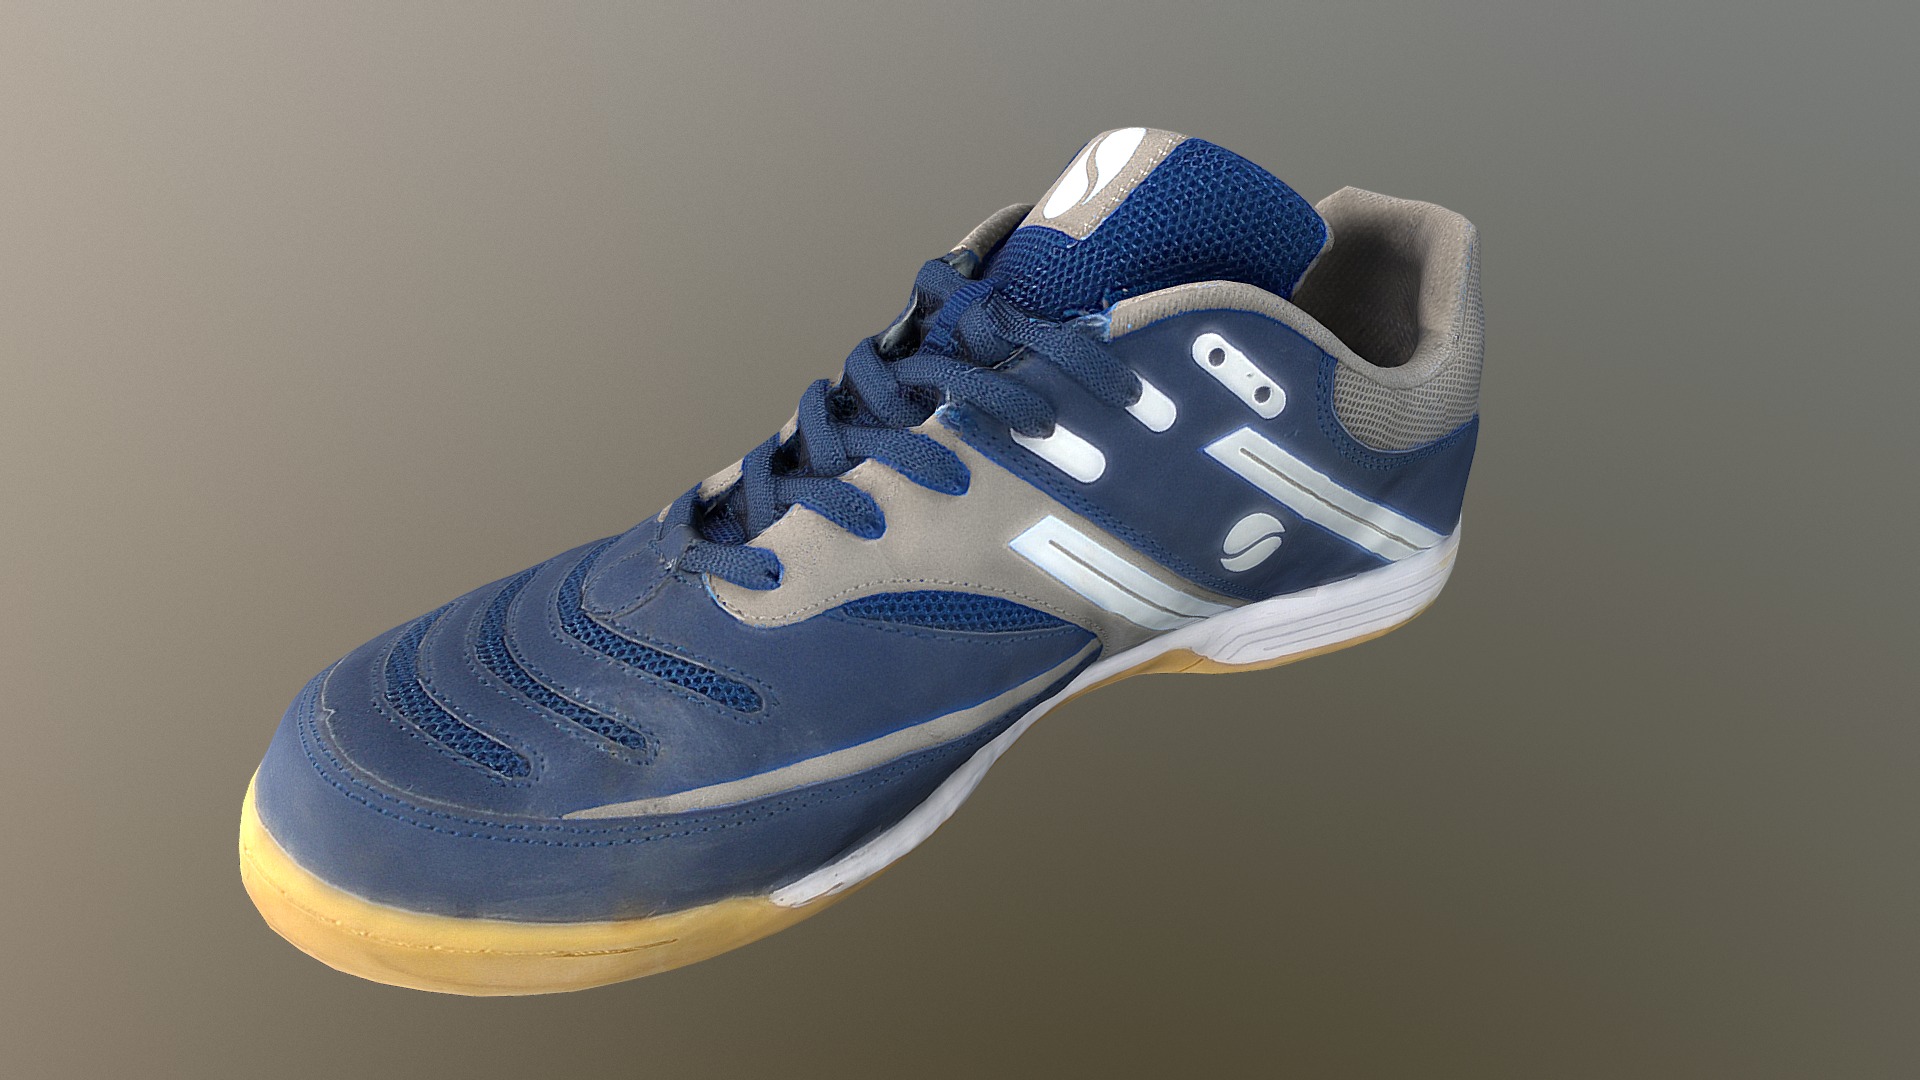 3D model Sport shoe low poly - This is a 3D model of the Sport shoe low poly. The 3D model is about a pair of blue and white sneakers.